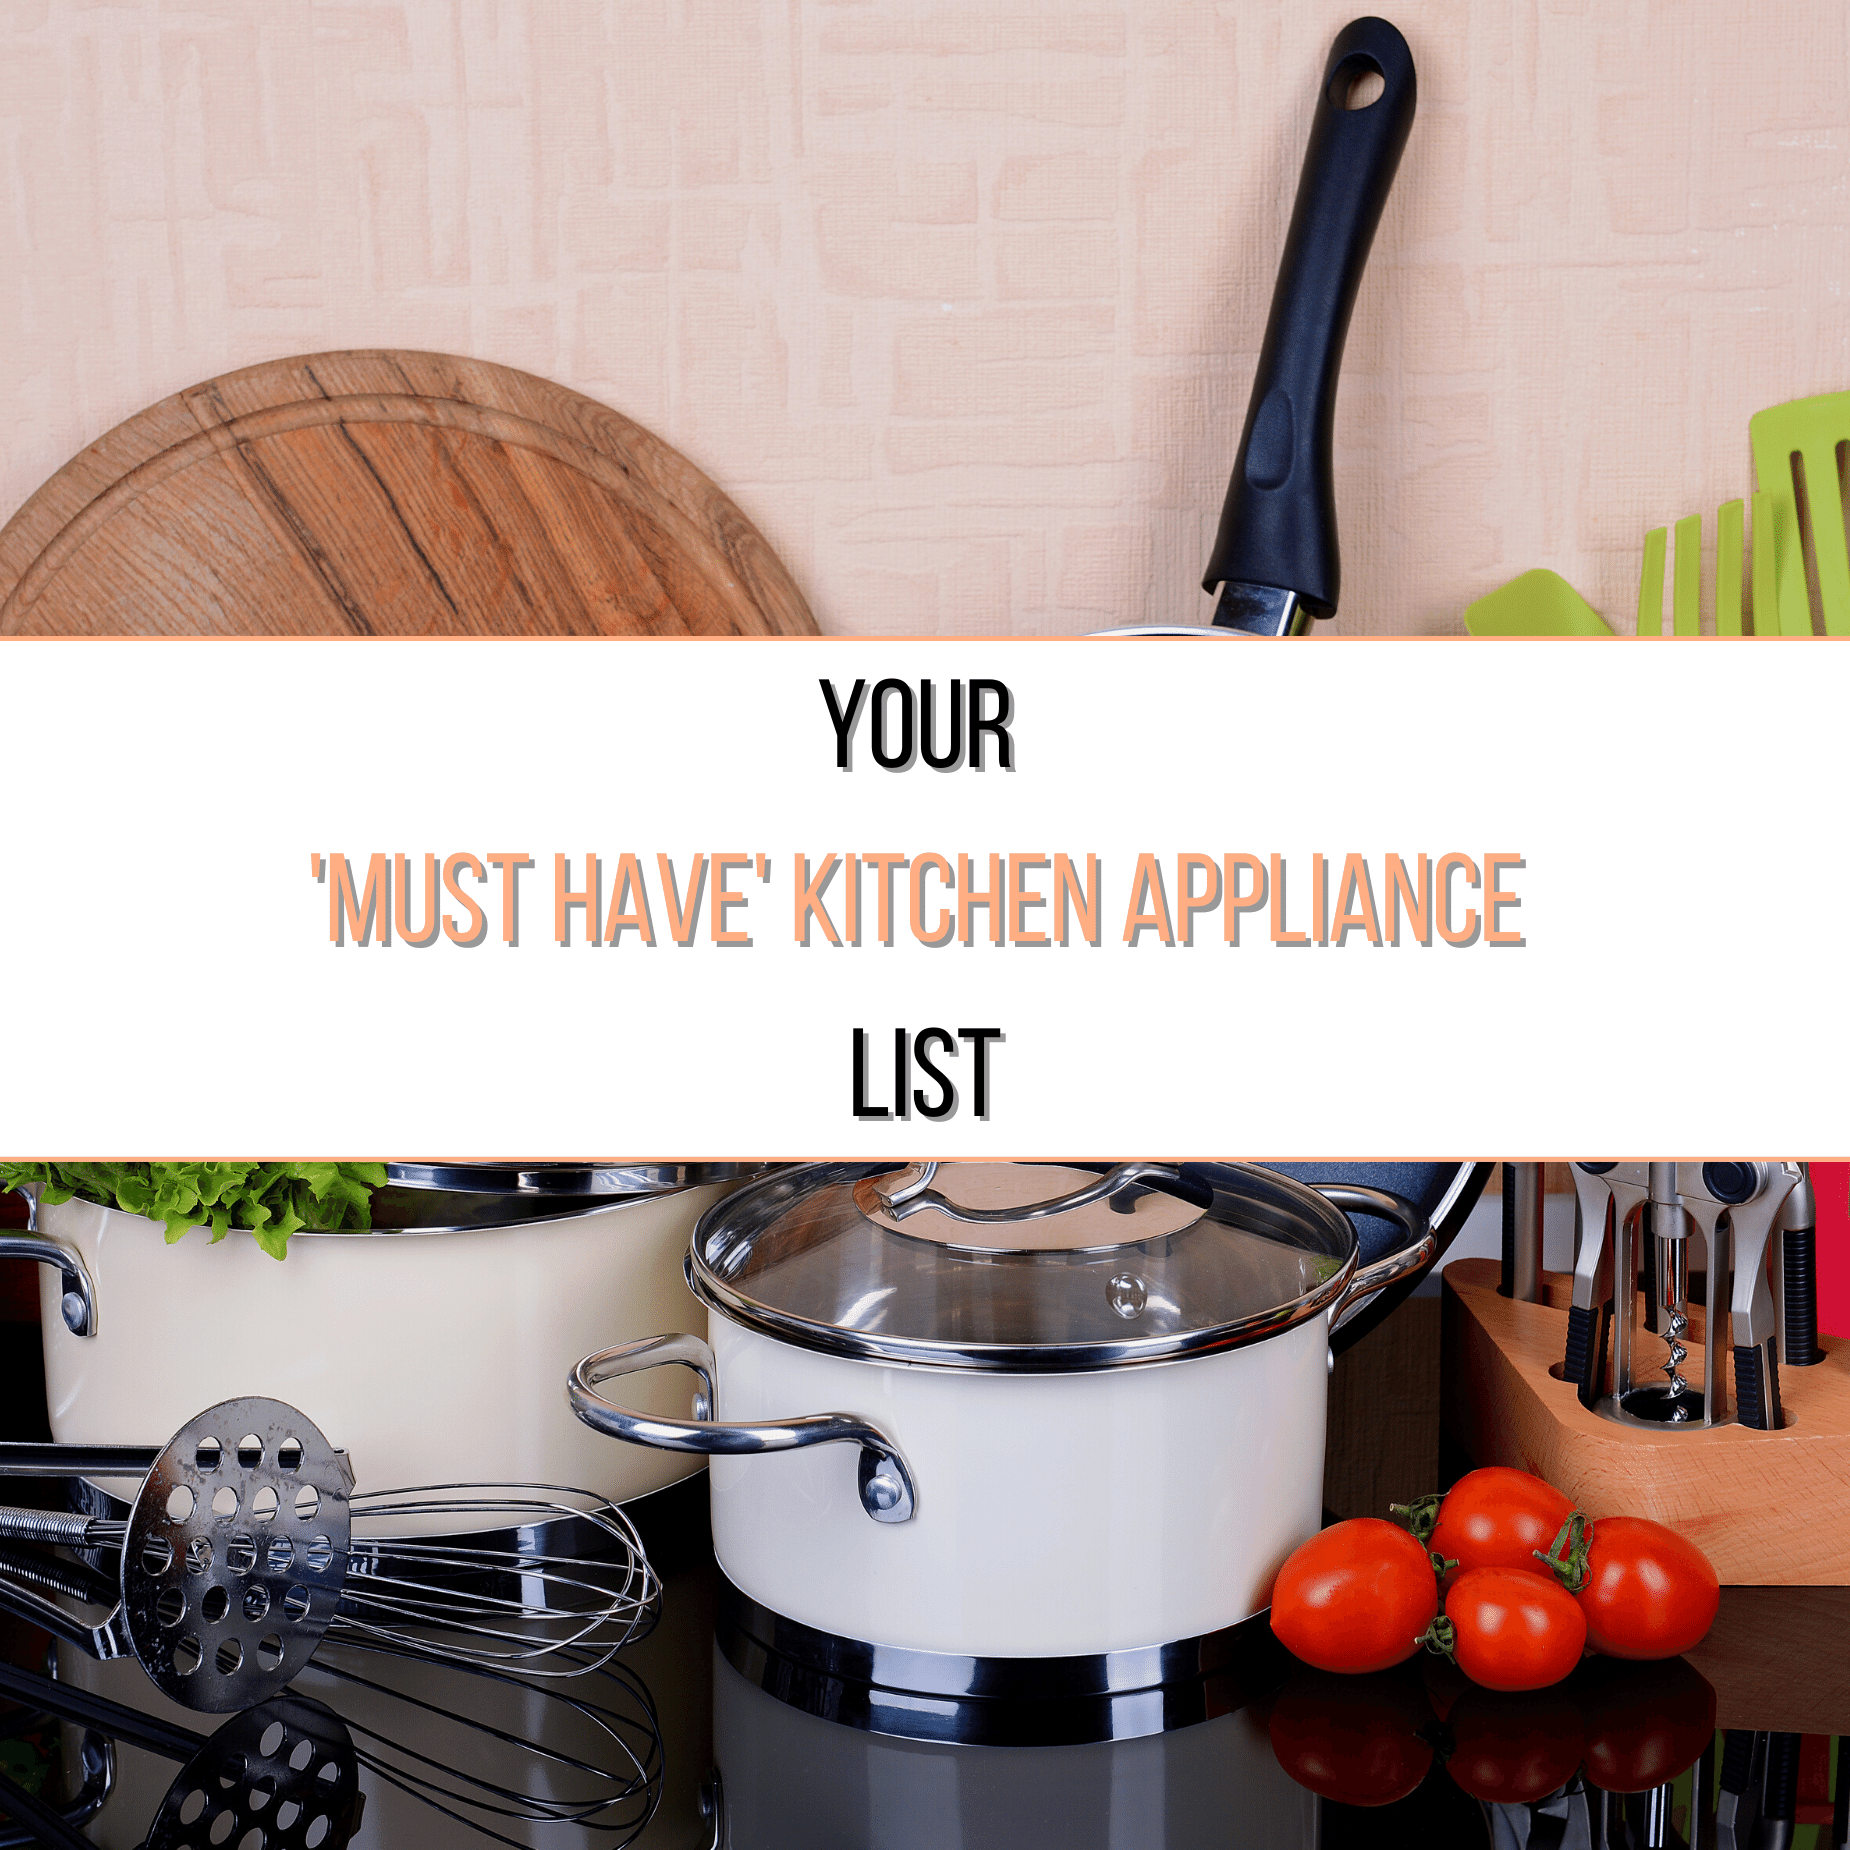 5 Small Kitchen Appliances That Are Actually Worth the Money